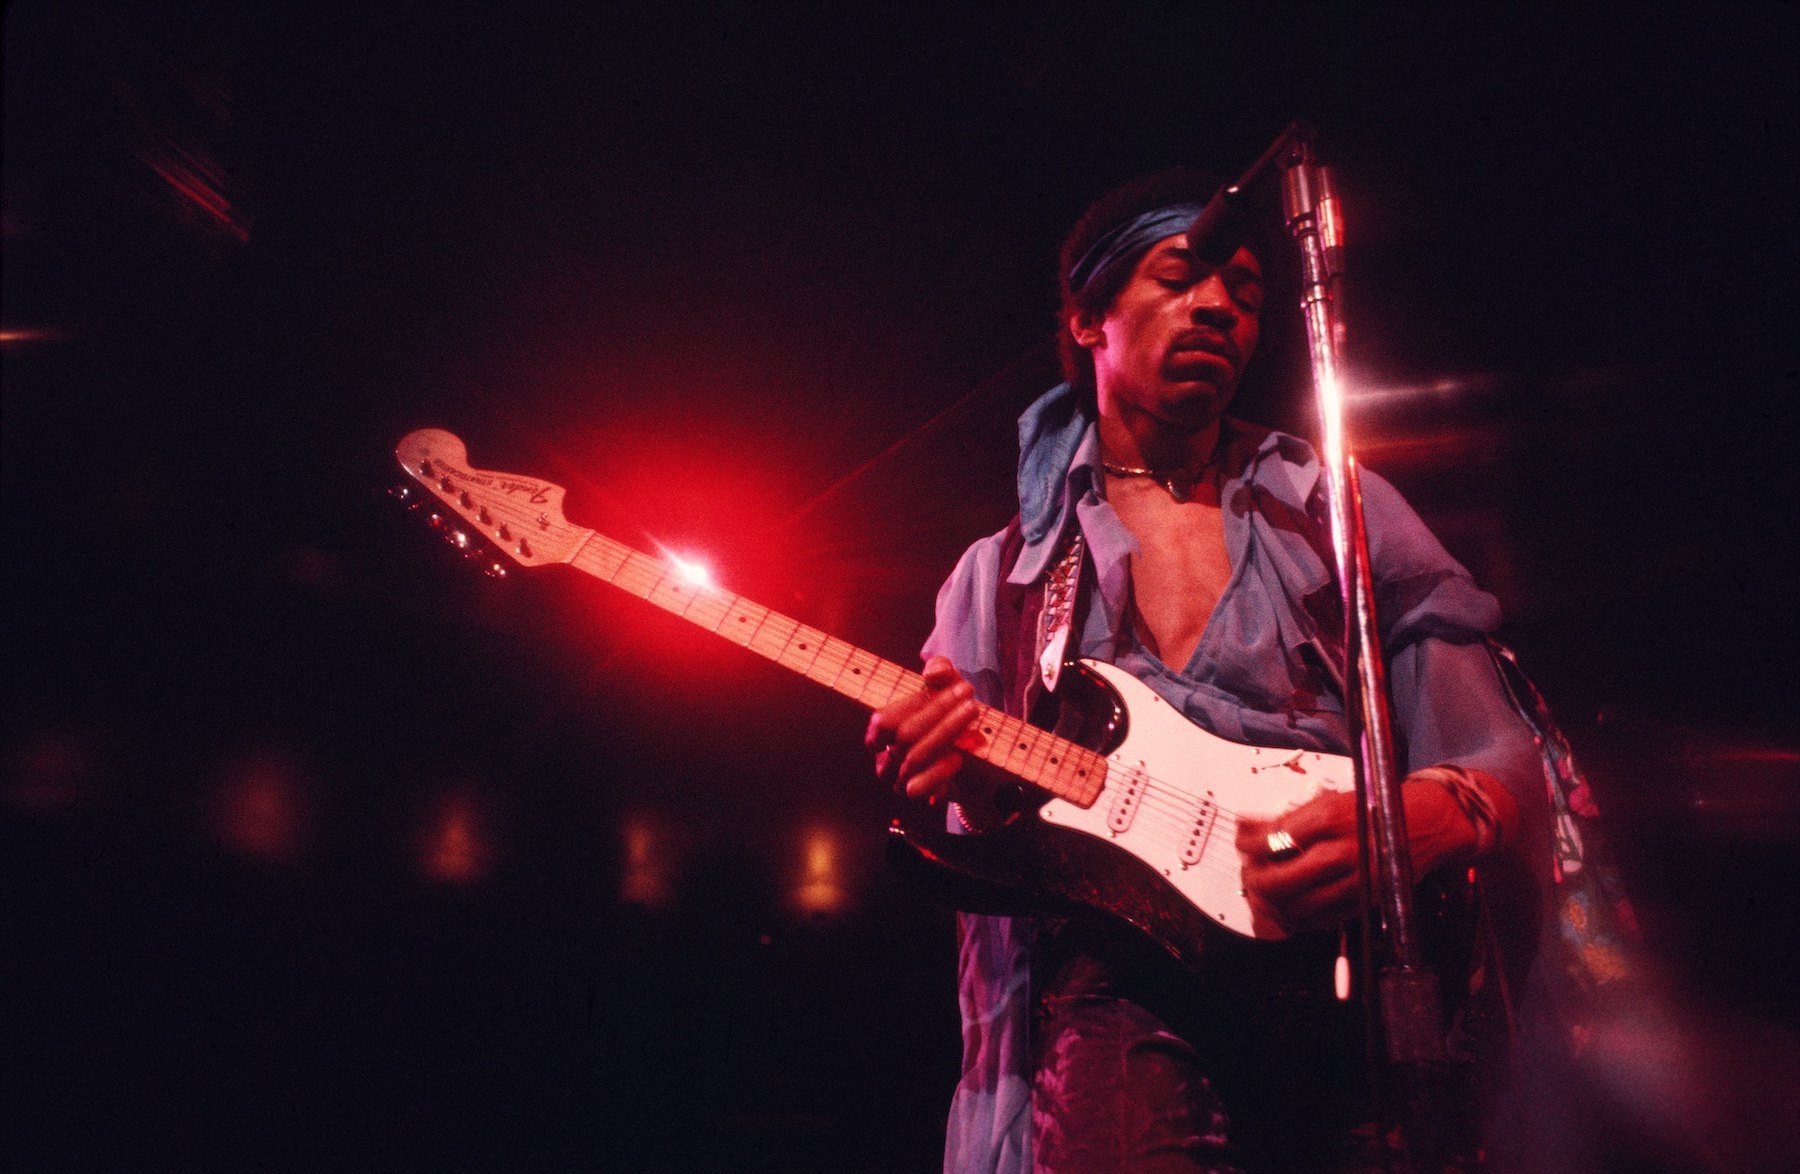 Jimi Hendrix, who was once kidnapped by the mafia, playing guitar